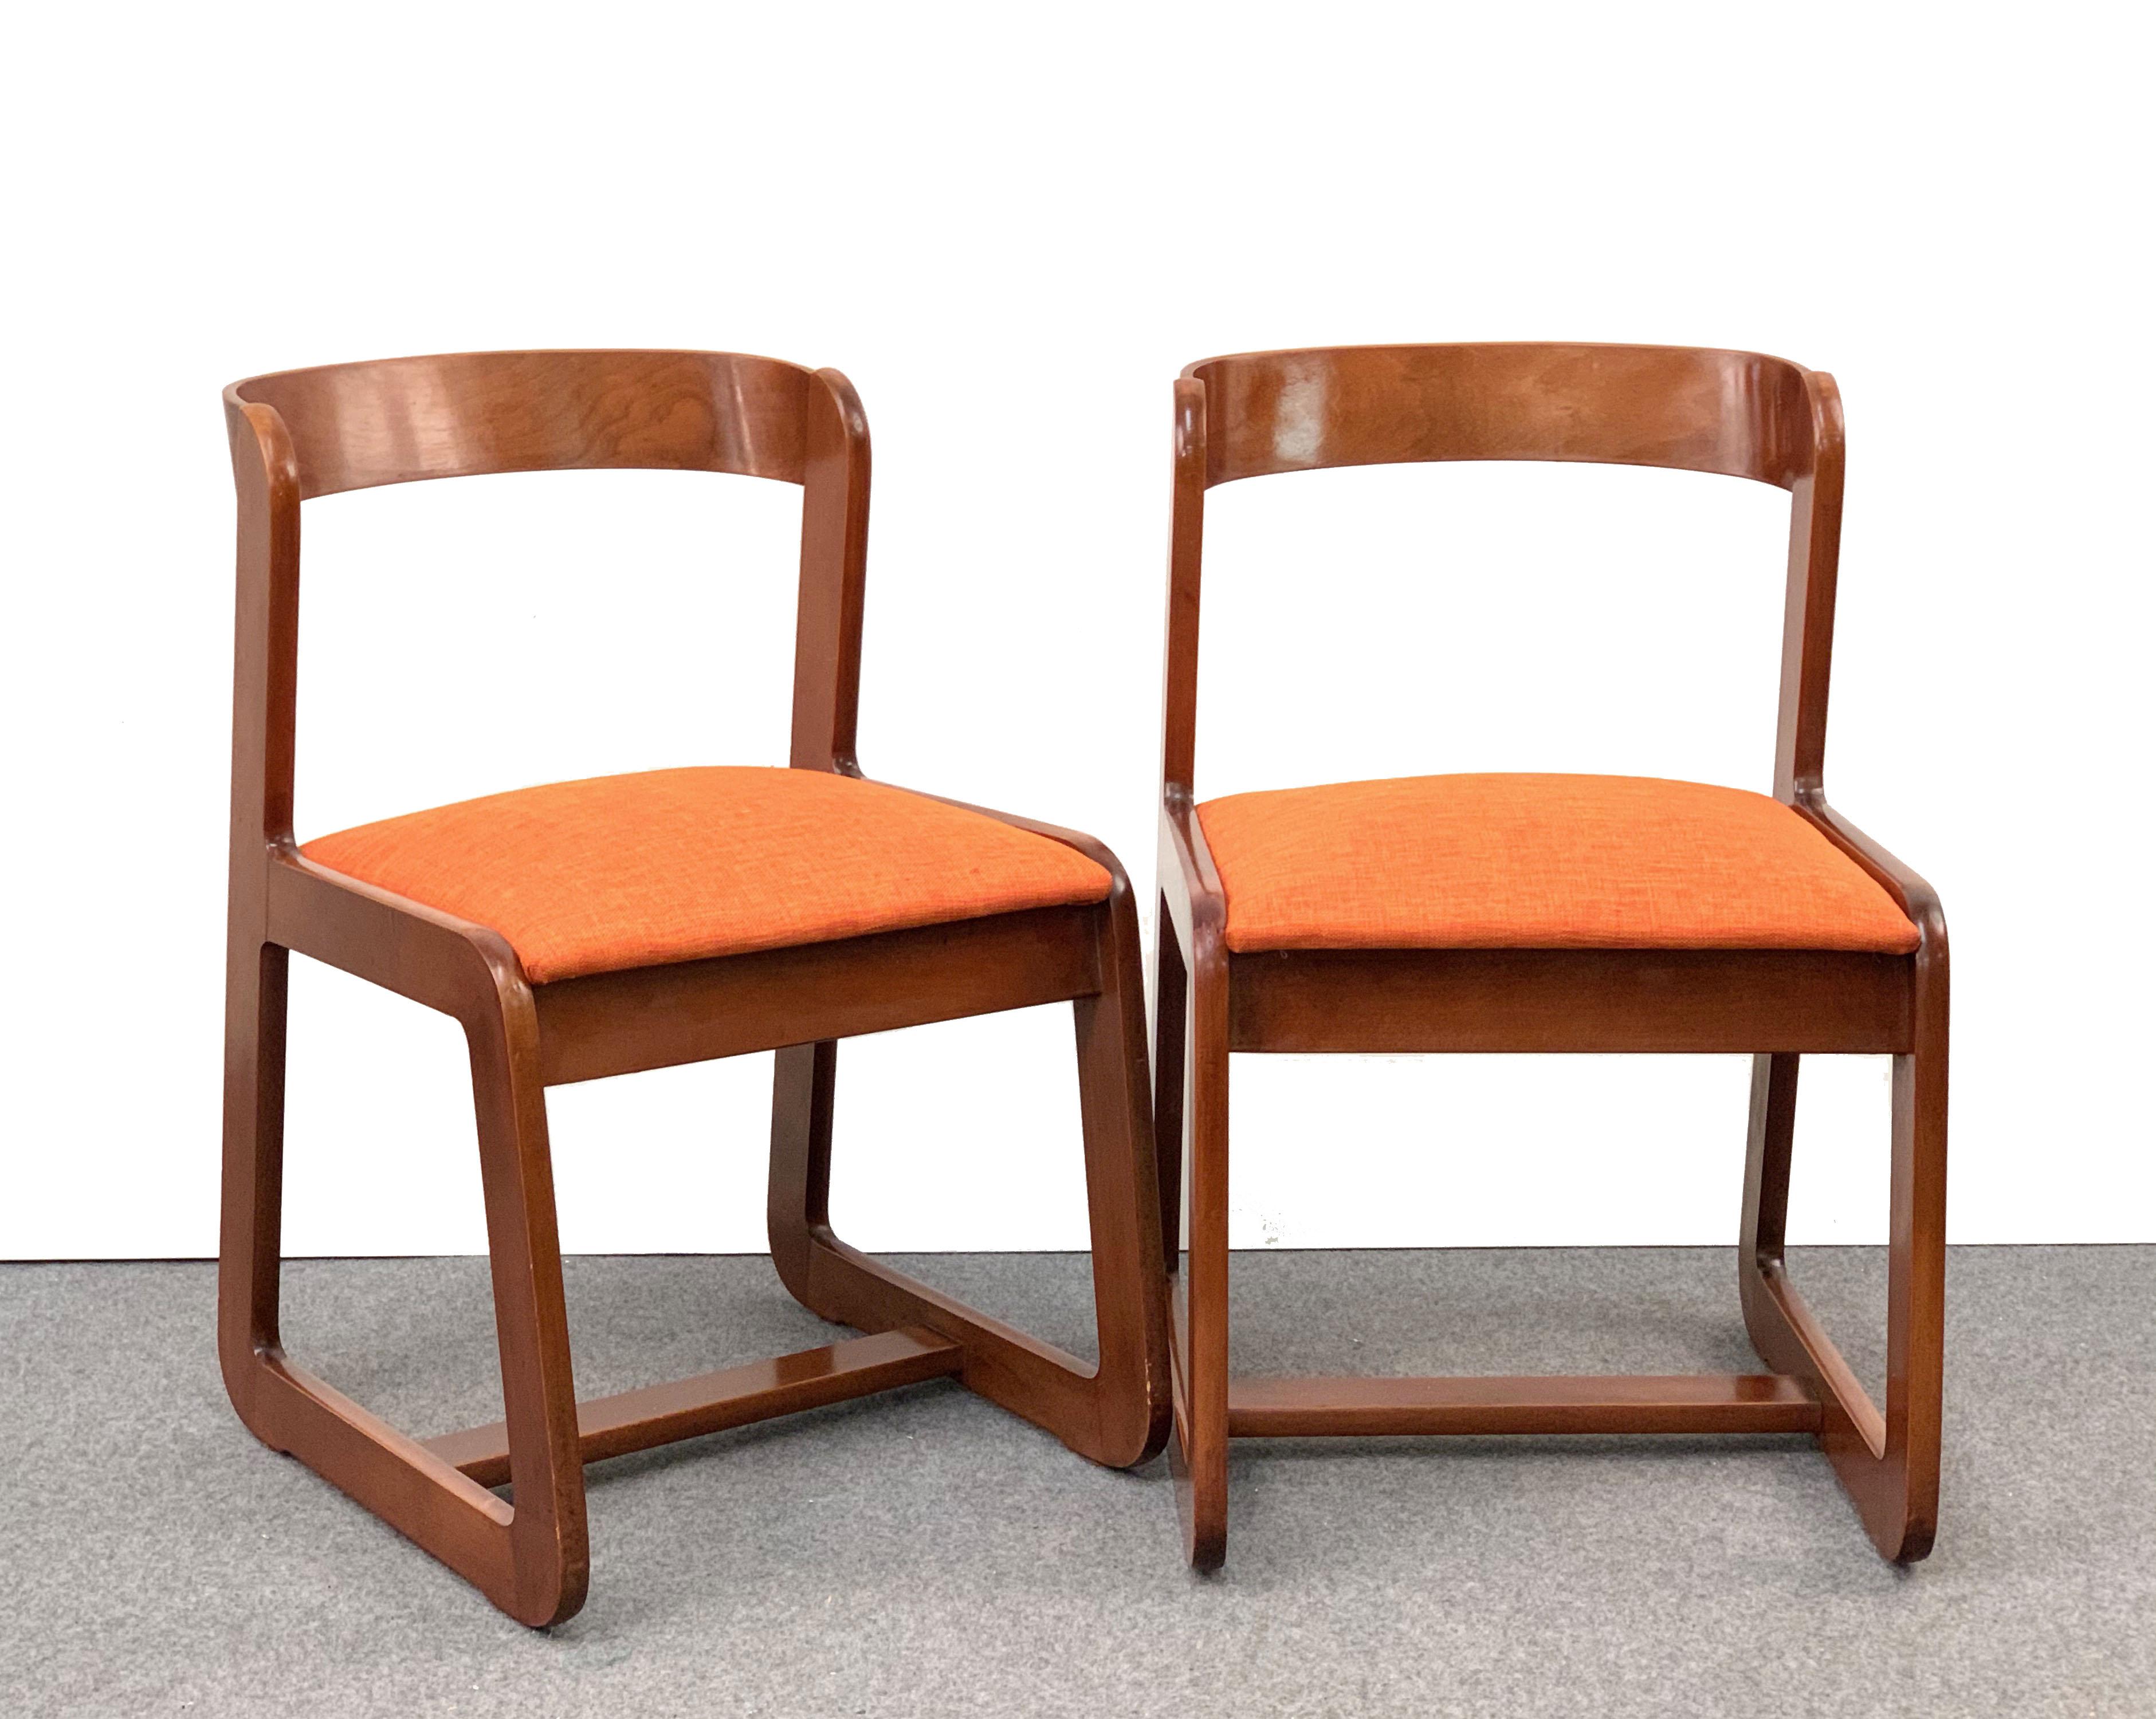 Beautiful set of six midcentury wooden chairs with orange fabric seats. These chairs were designed by Willy Rizzo for Mario Sabot.

This marvelous set was produced in the 1970s in Italy. The curved wood back has sinuous lines, while the upholstery